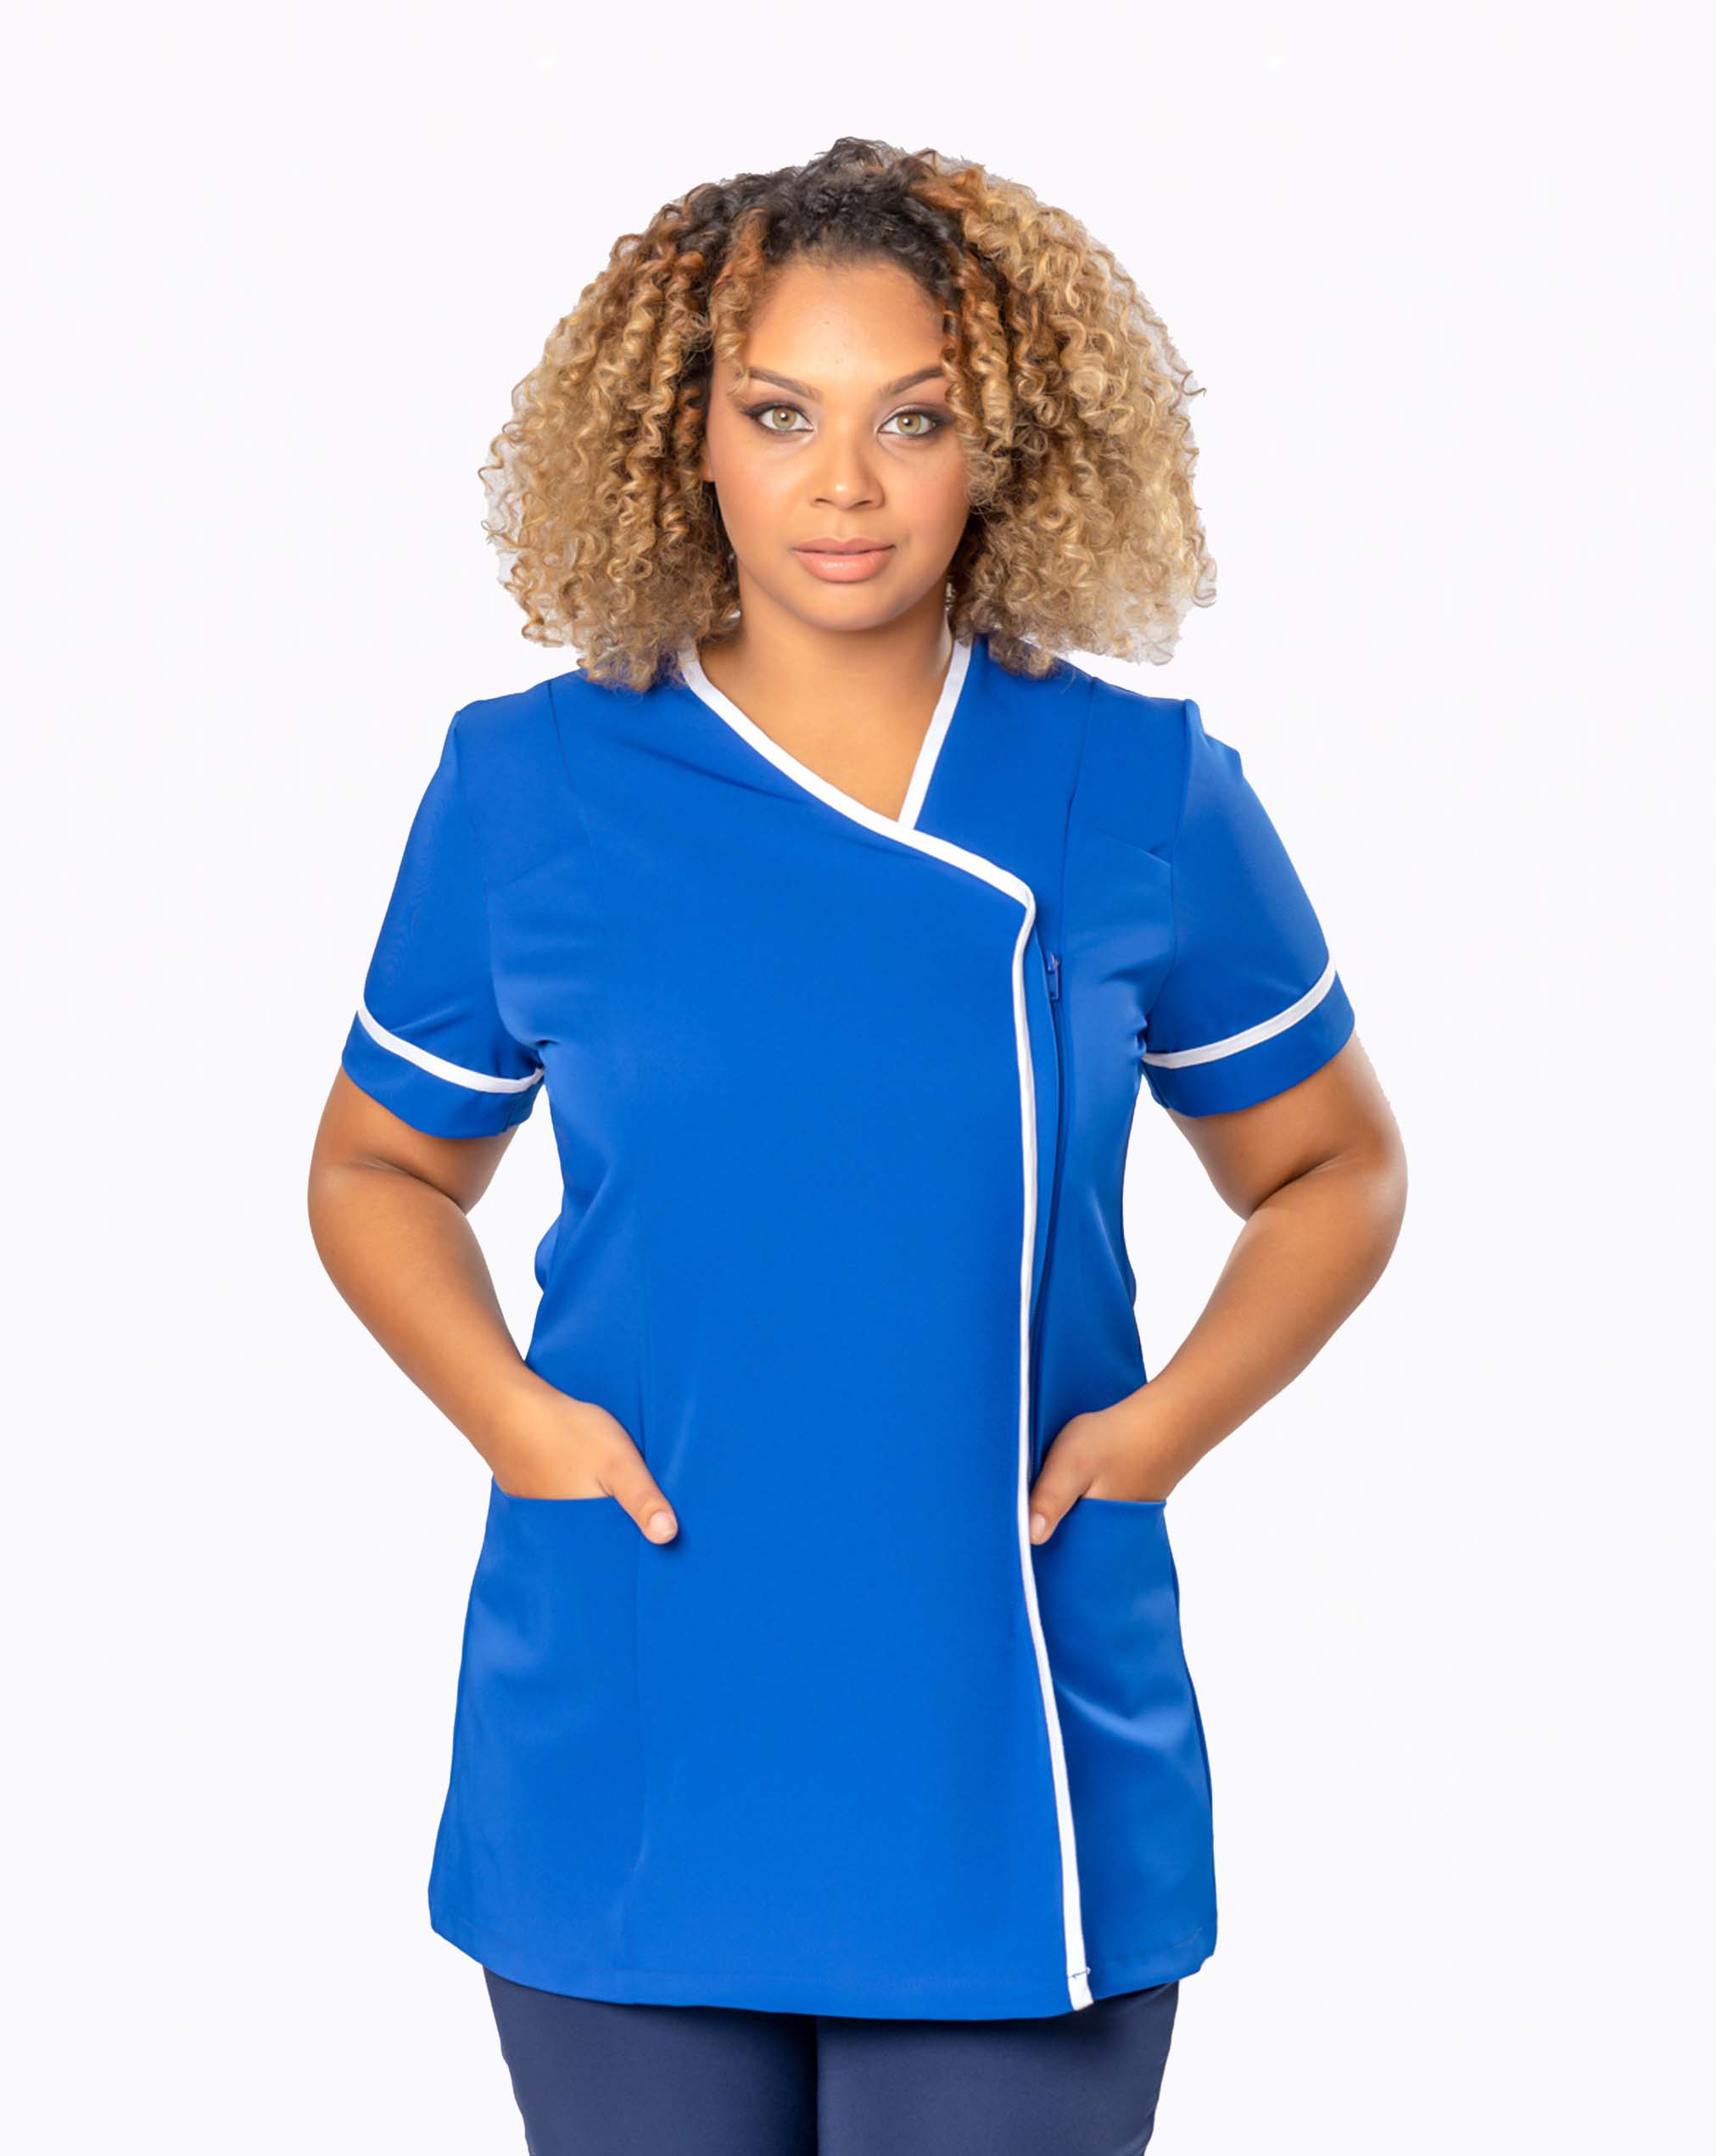 Eden Healthcare Tunic with Pockets - Royal Blue / White